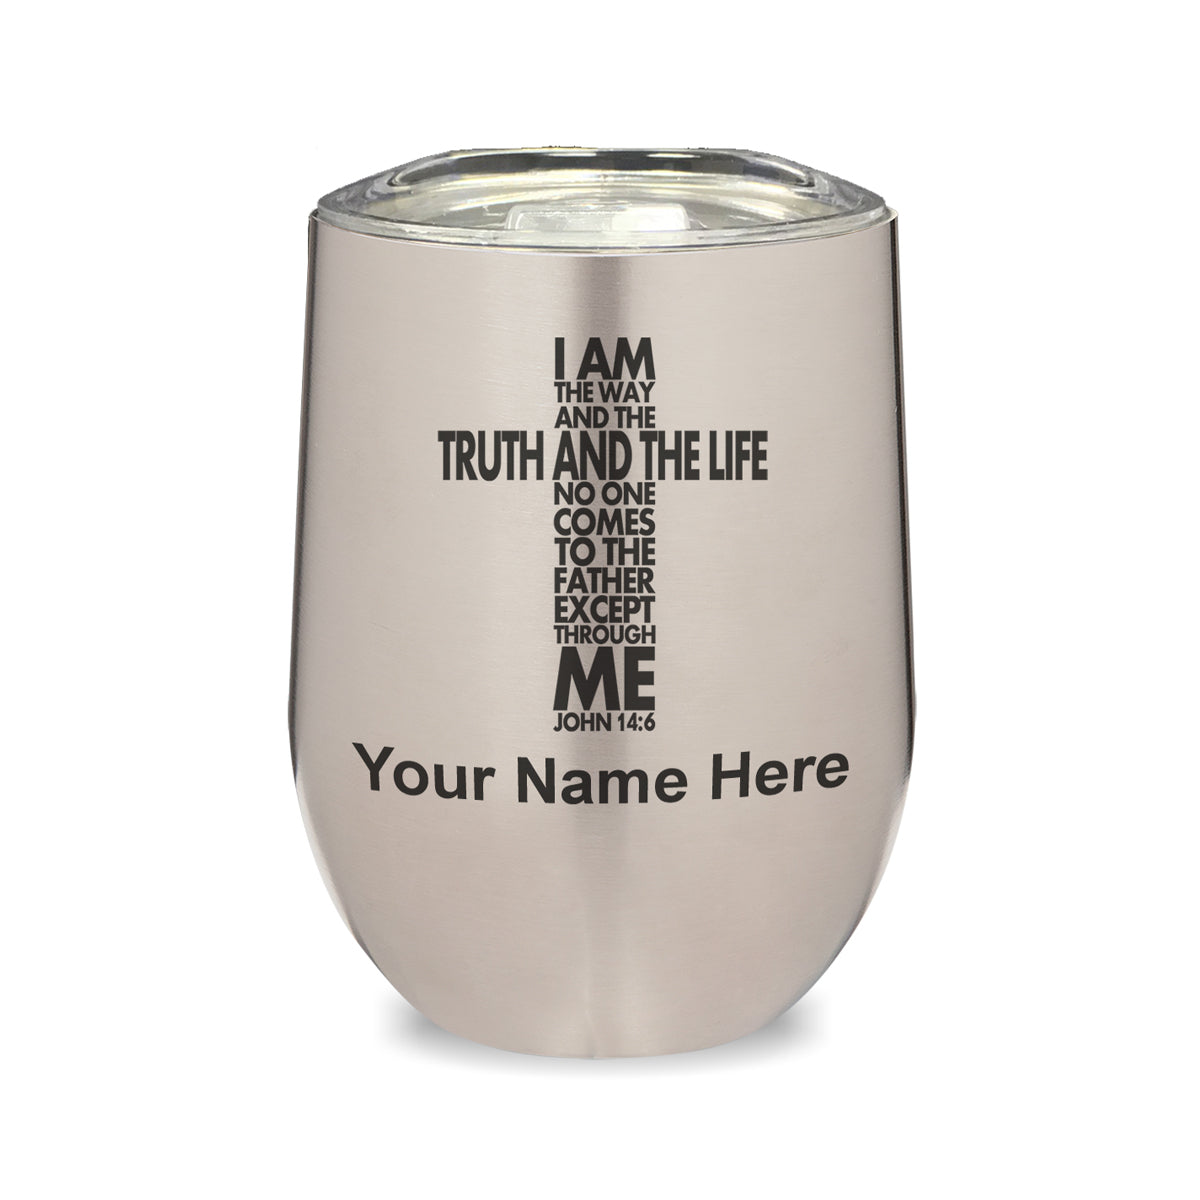 LaserGram Double Wall Stainless Steel Wine Glass, Bible Verse John 14-6, Personalized Engraving Included